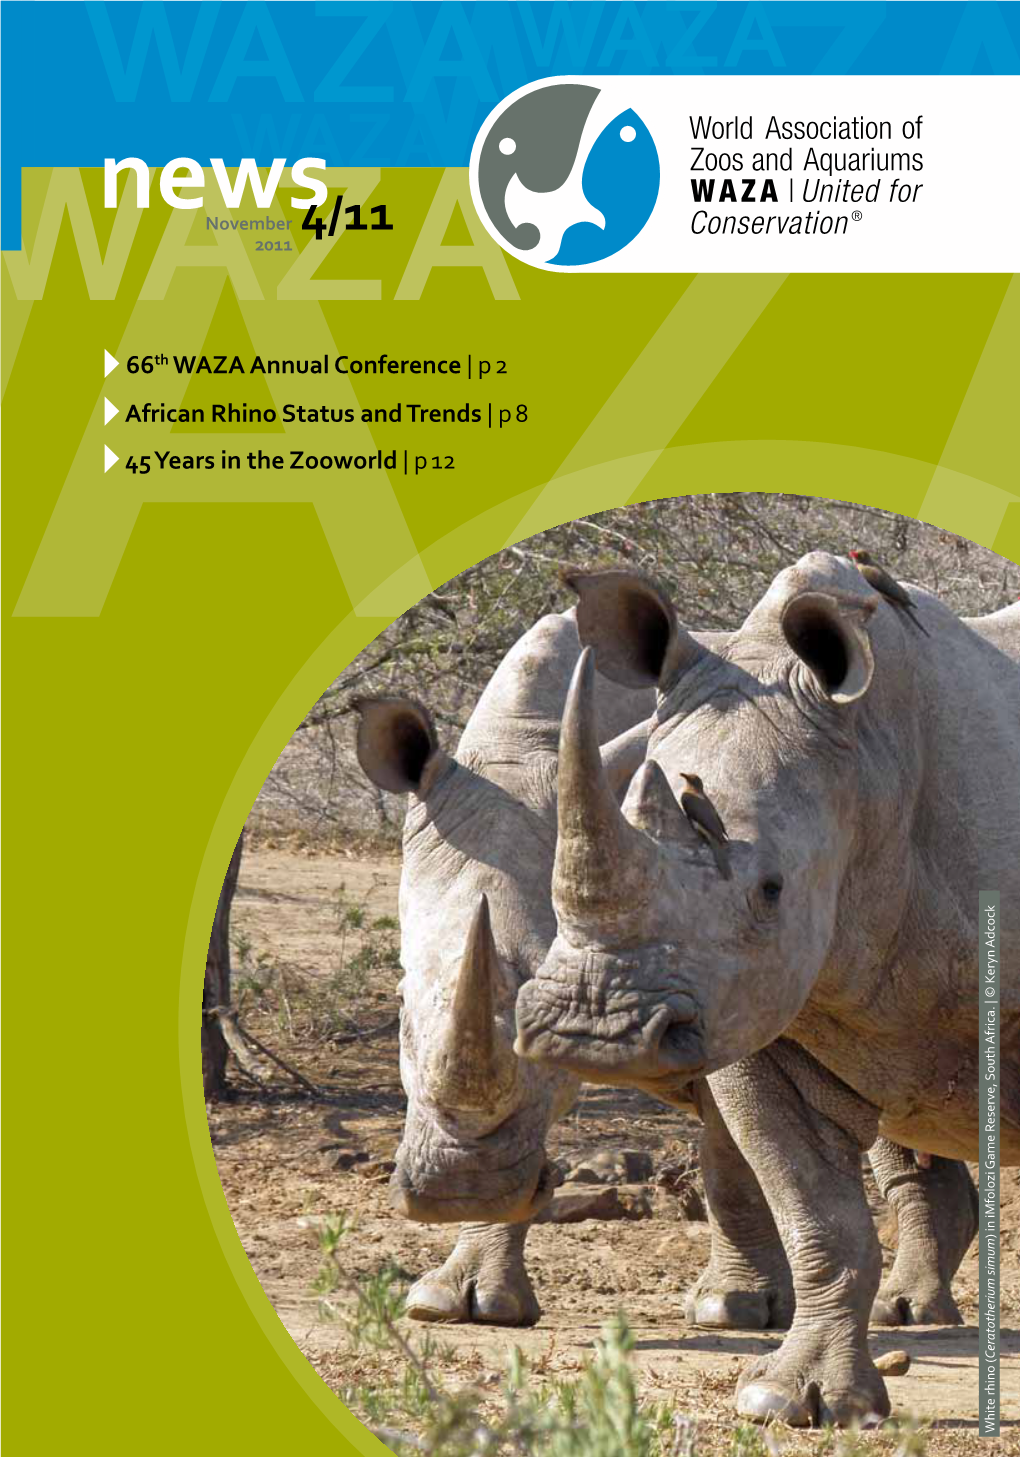 66Th WAZA Annual Conference | P 2 African Rhino Status and Trends | P 8 45 Years in the Zooworld | P 12 ) in Imfolozi Game Reserve, South Africa